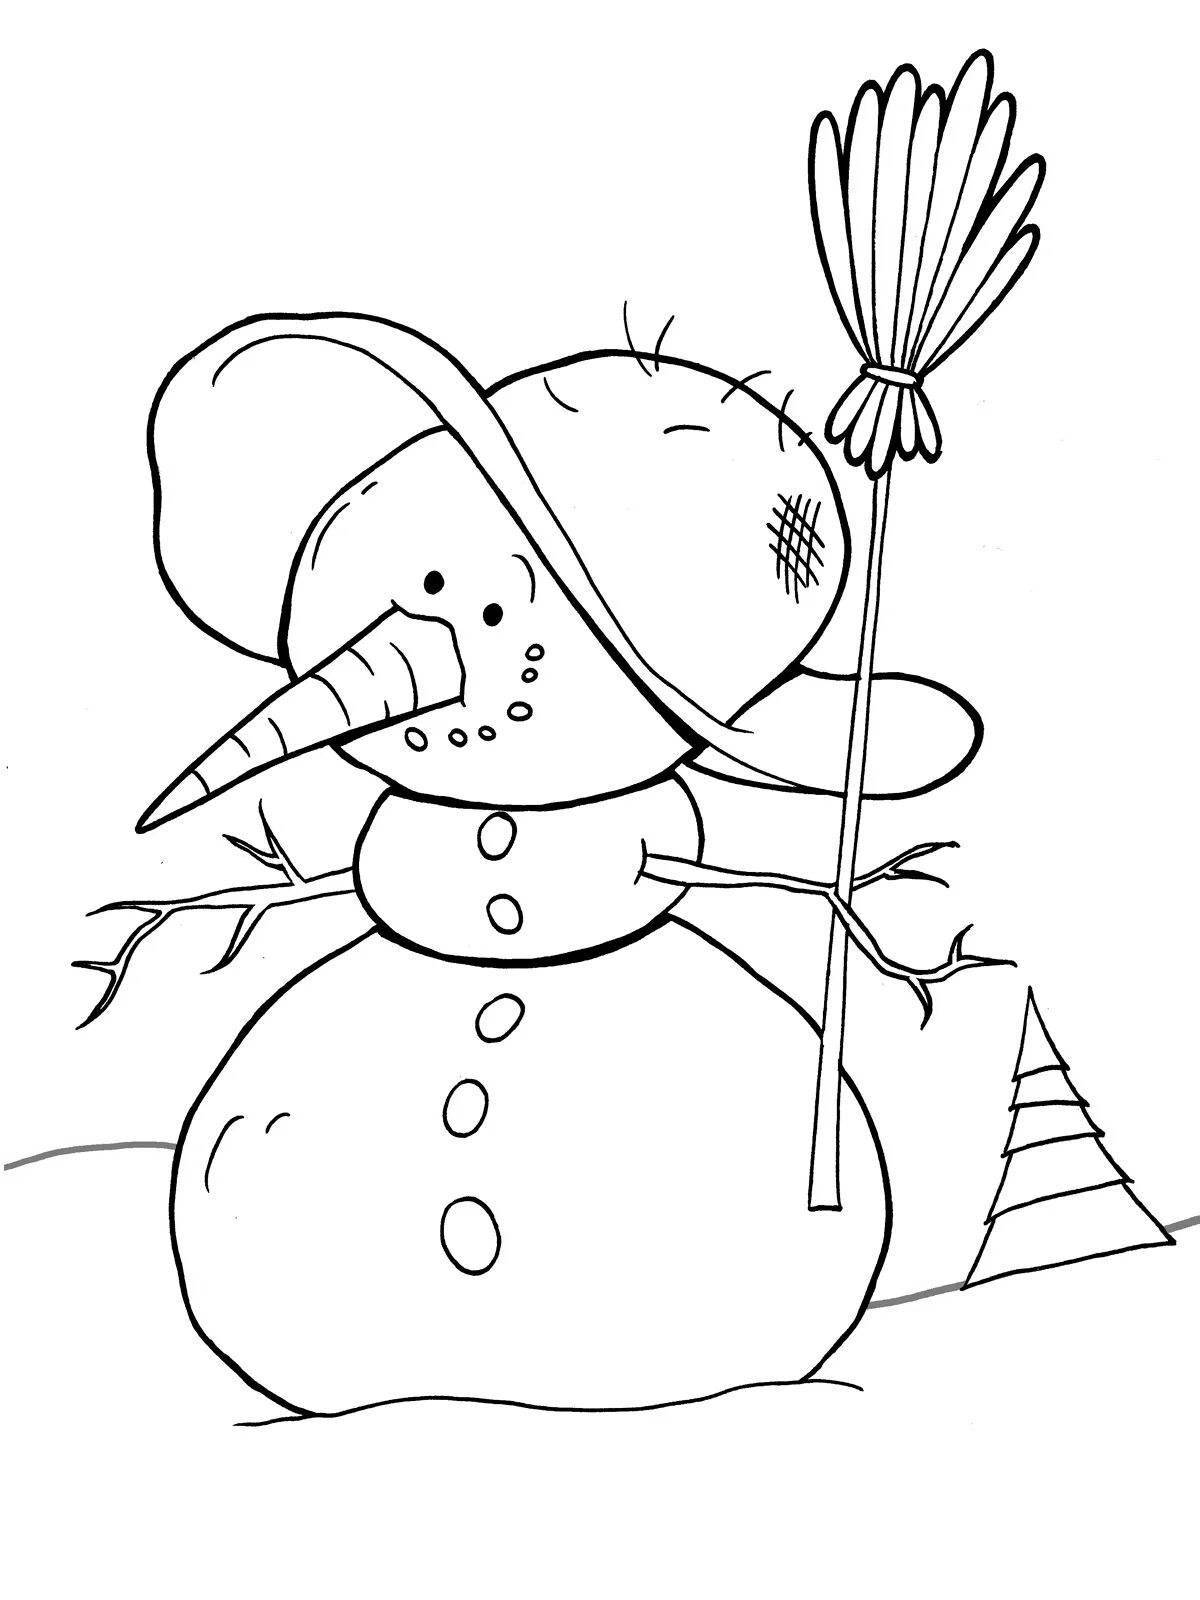 Fun coloring funny snowman for kids